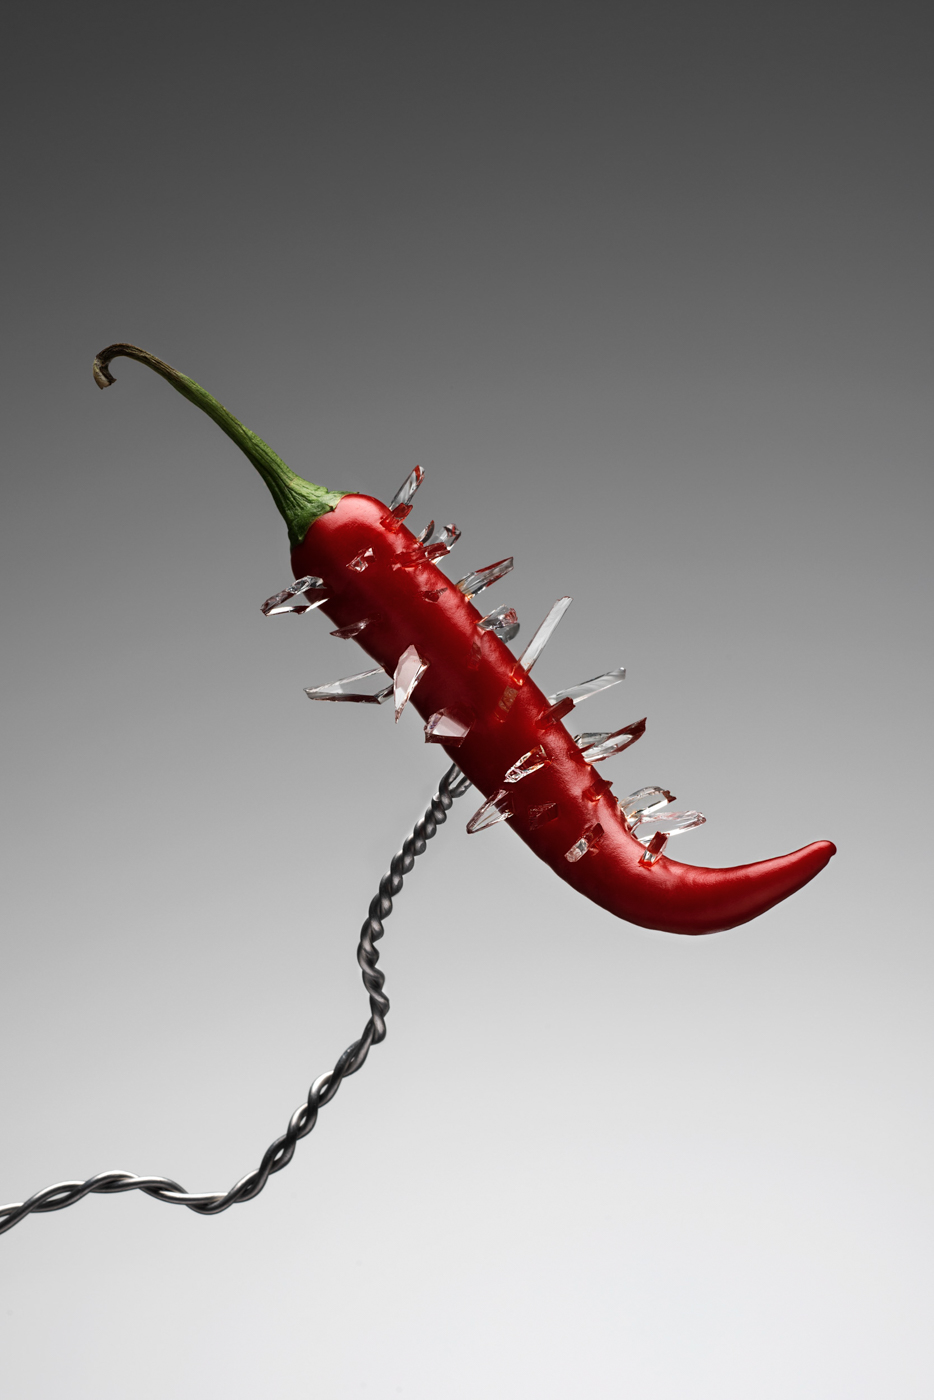 multiple small pieces of glass on a chili by Tomas Olsen